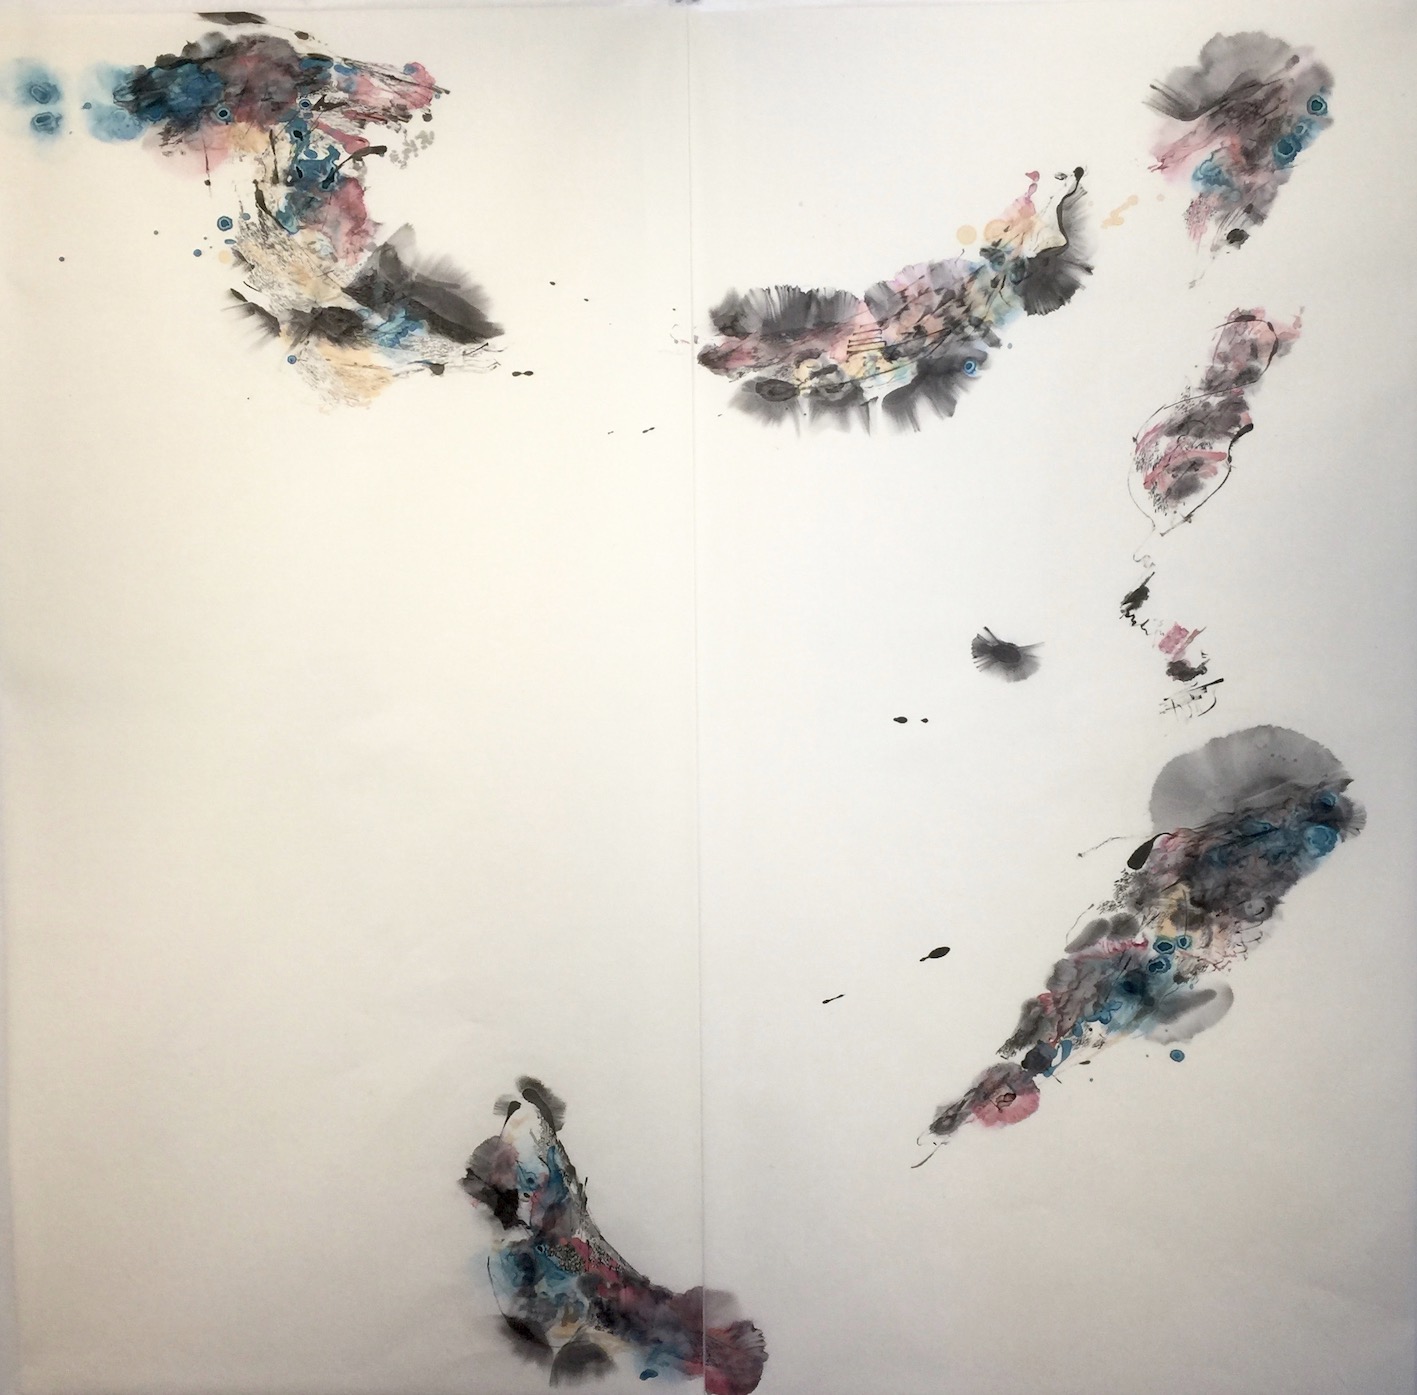 Opening up lines in space 1, 空間に線を開く 1 138 cms x 70 cms x 2 Sumi ink, acrylic, water colour 墨水彩絵具、アクリル2021